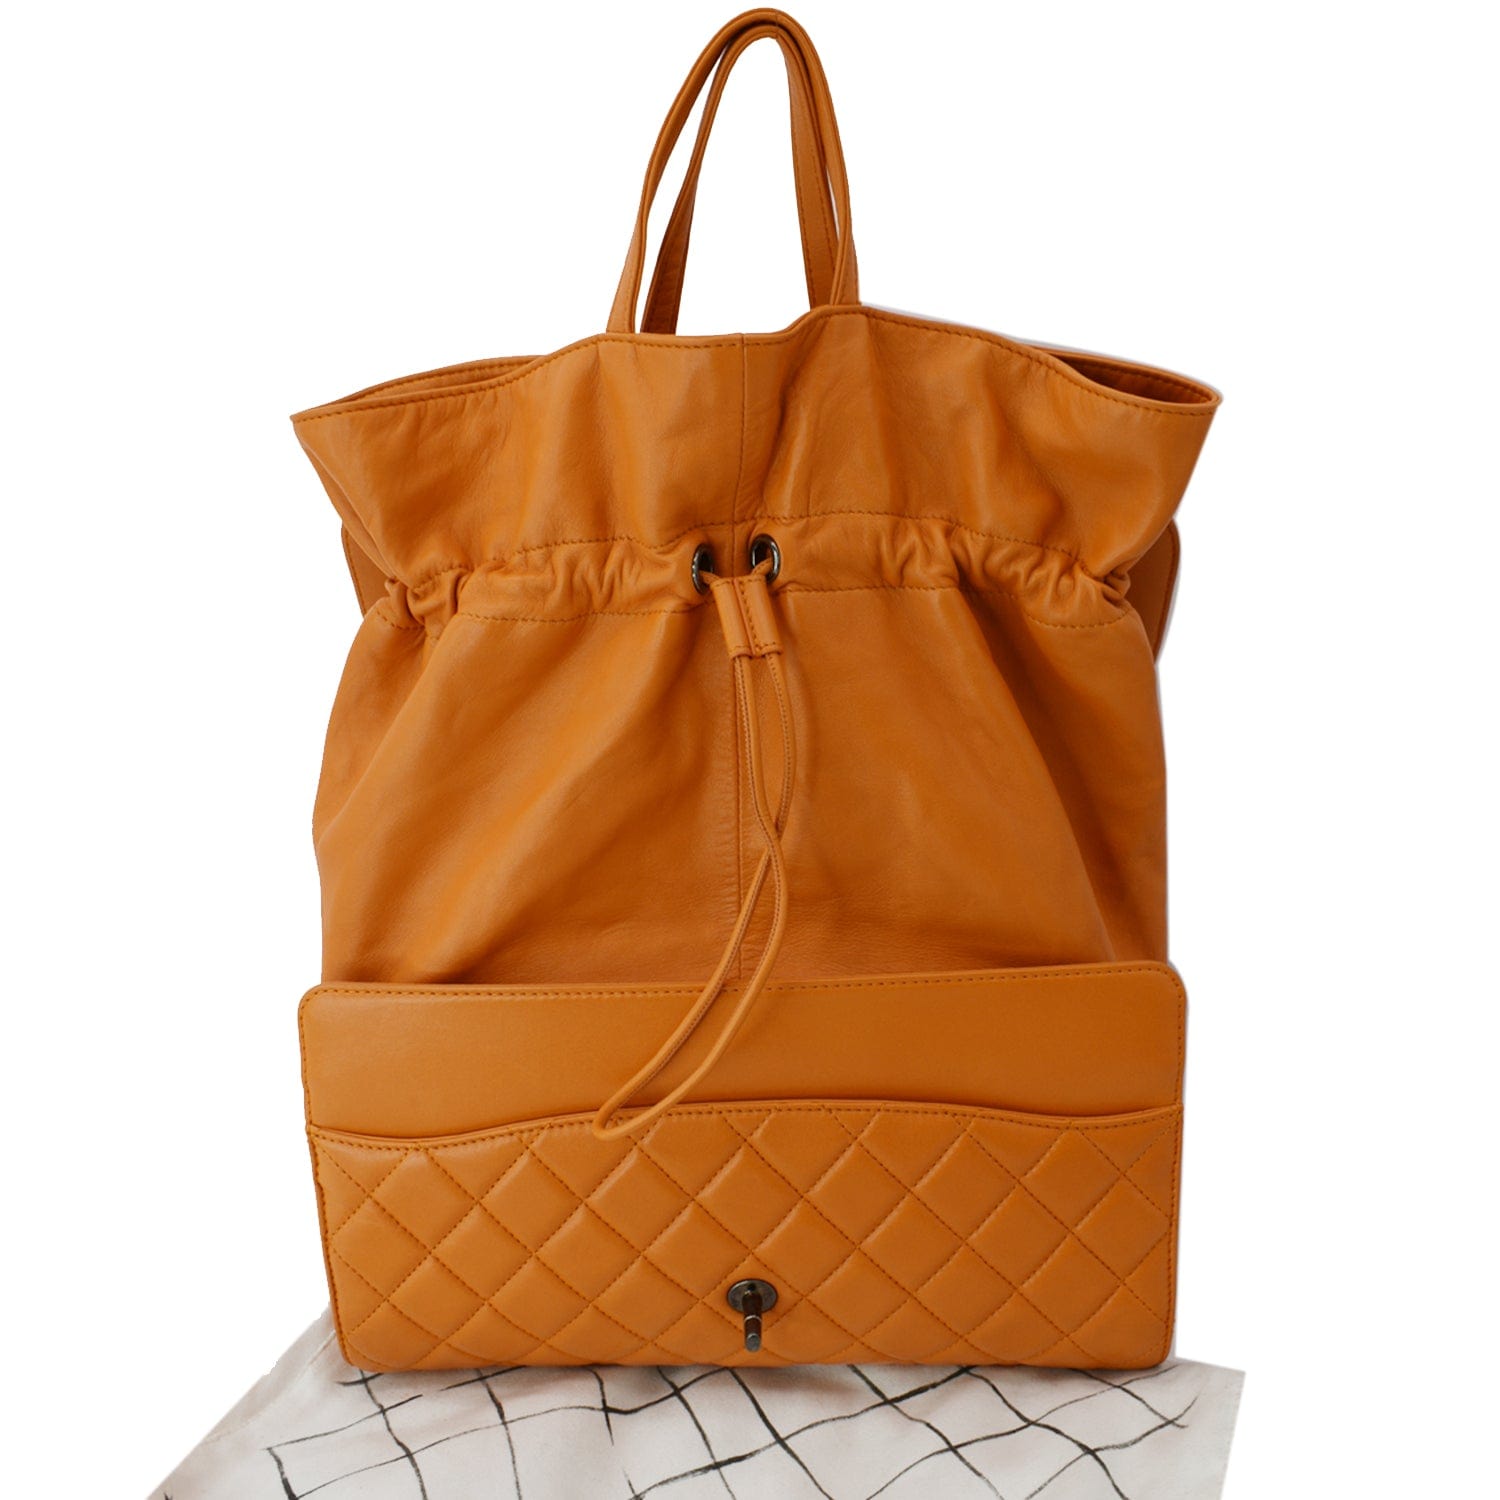 CHANEL Lambskin Quilted Jumbo Grocery By Chanel Drawstring Shopping Bag  Orange 731671